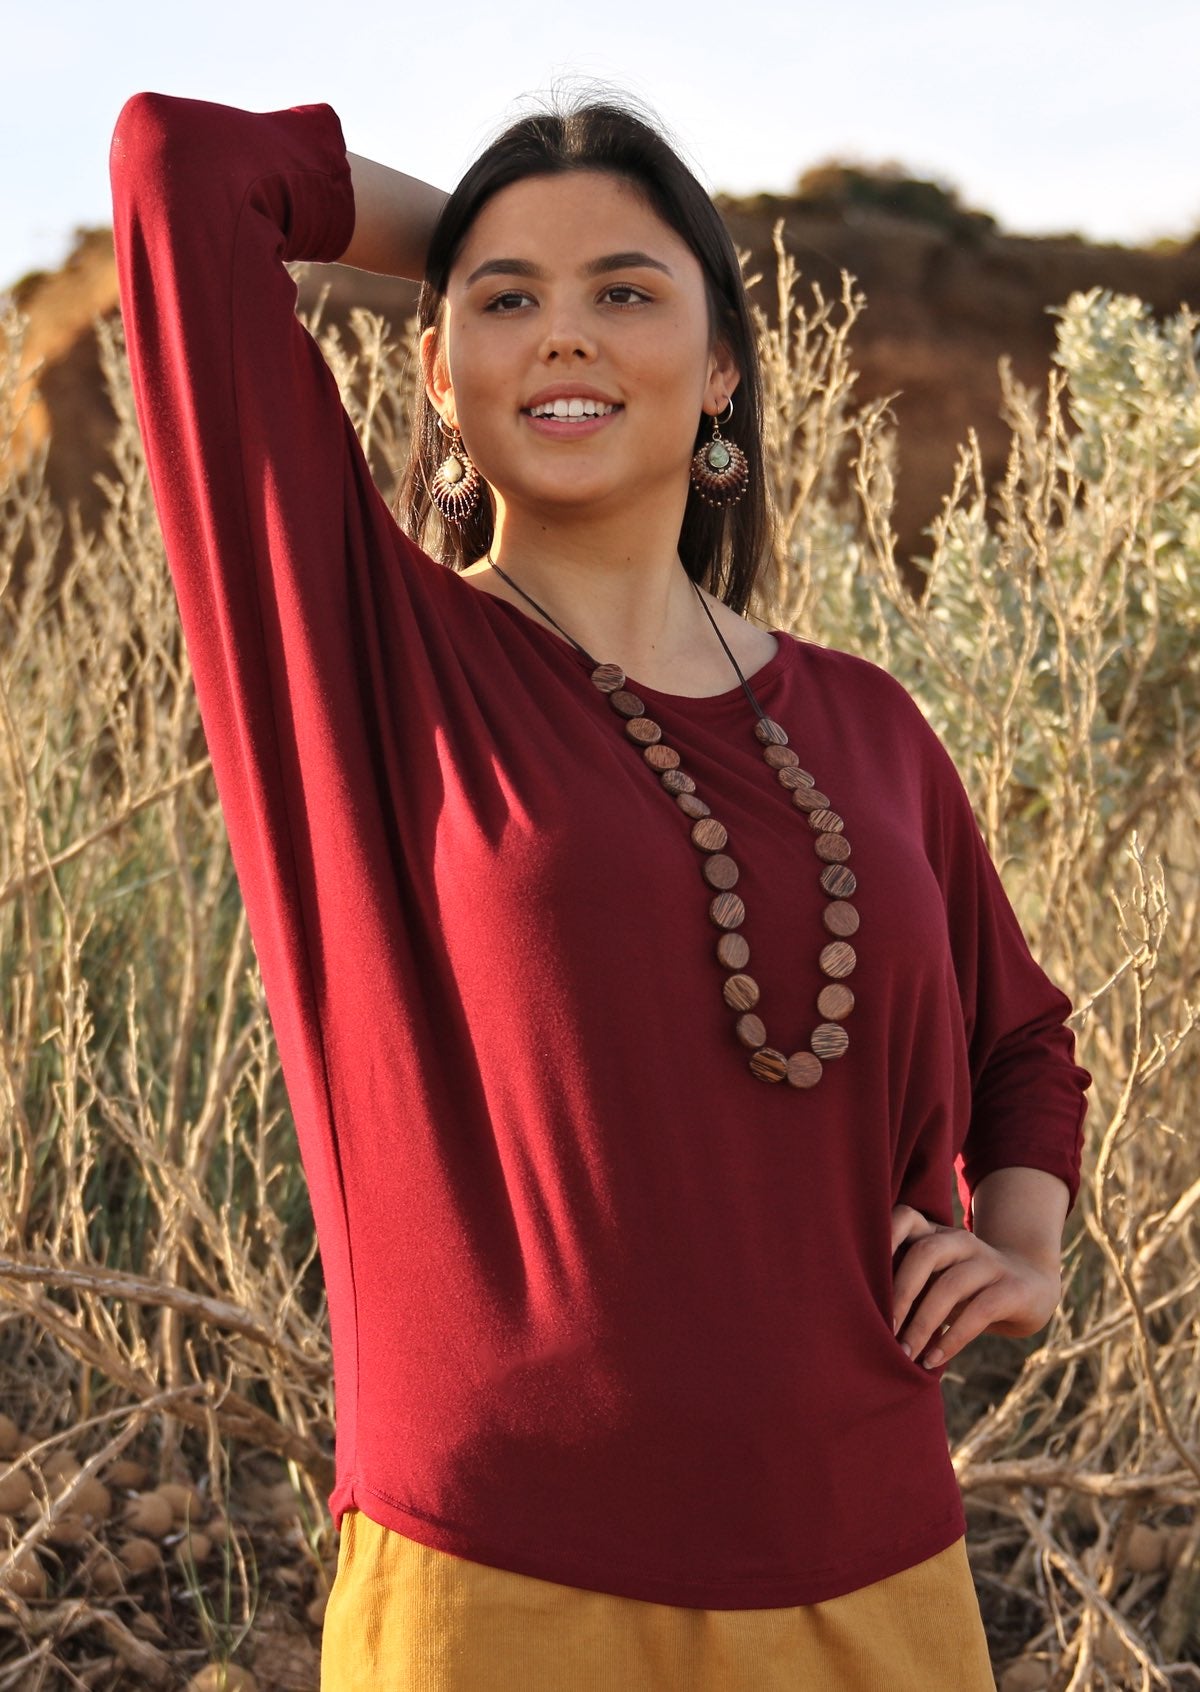 Woman wearing a 3/4 sleeve rayon batwing round neckline maroon top with wooden beads.